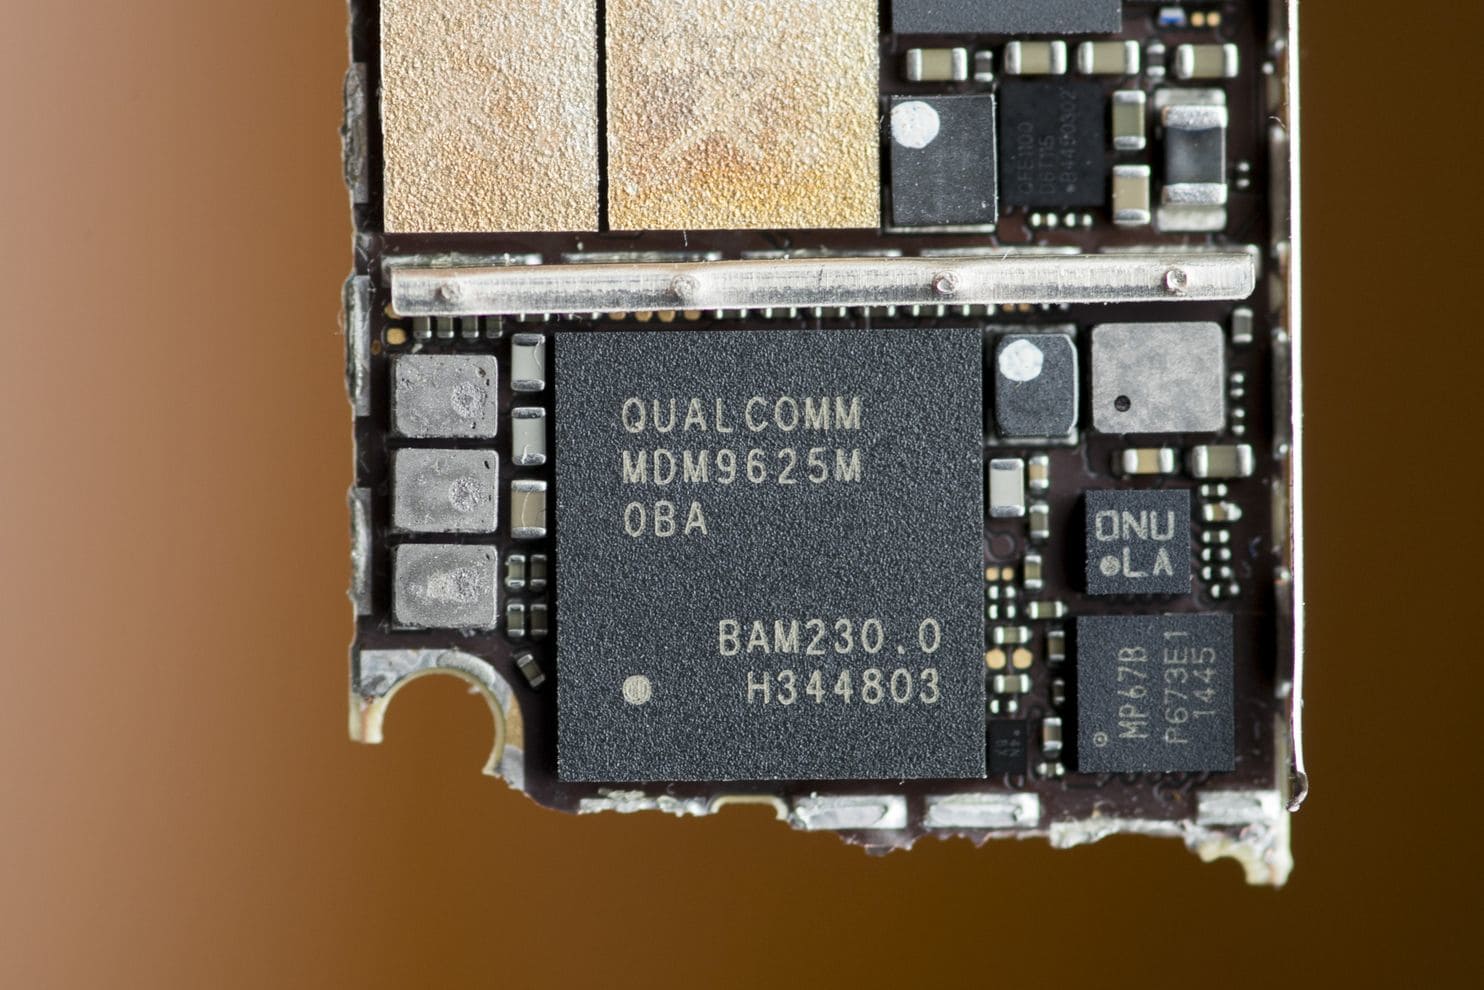 Apple said Qualcomm's technology was not good; internally, it was “the best”